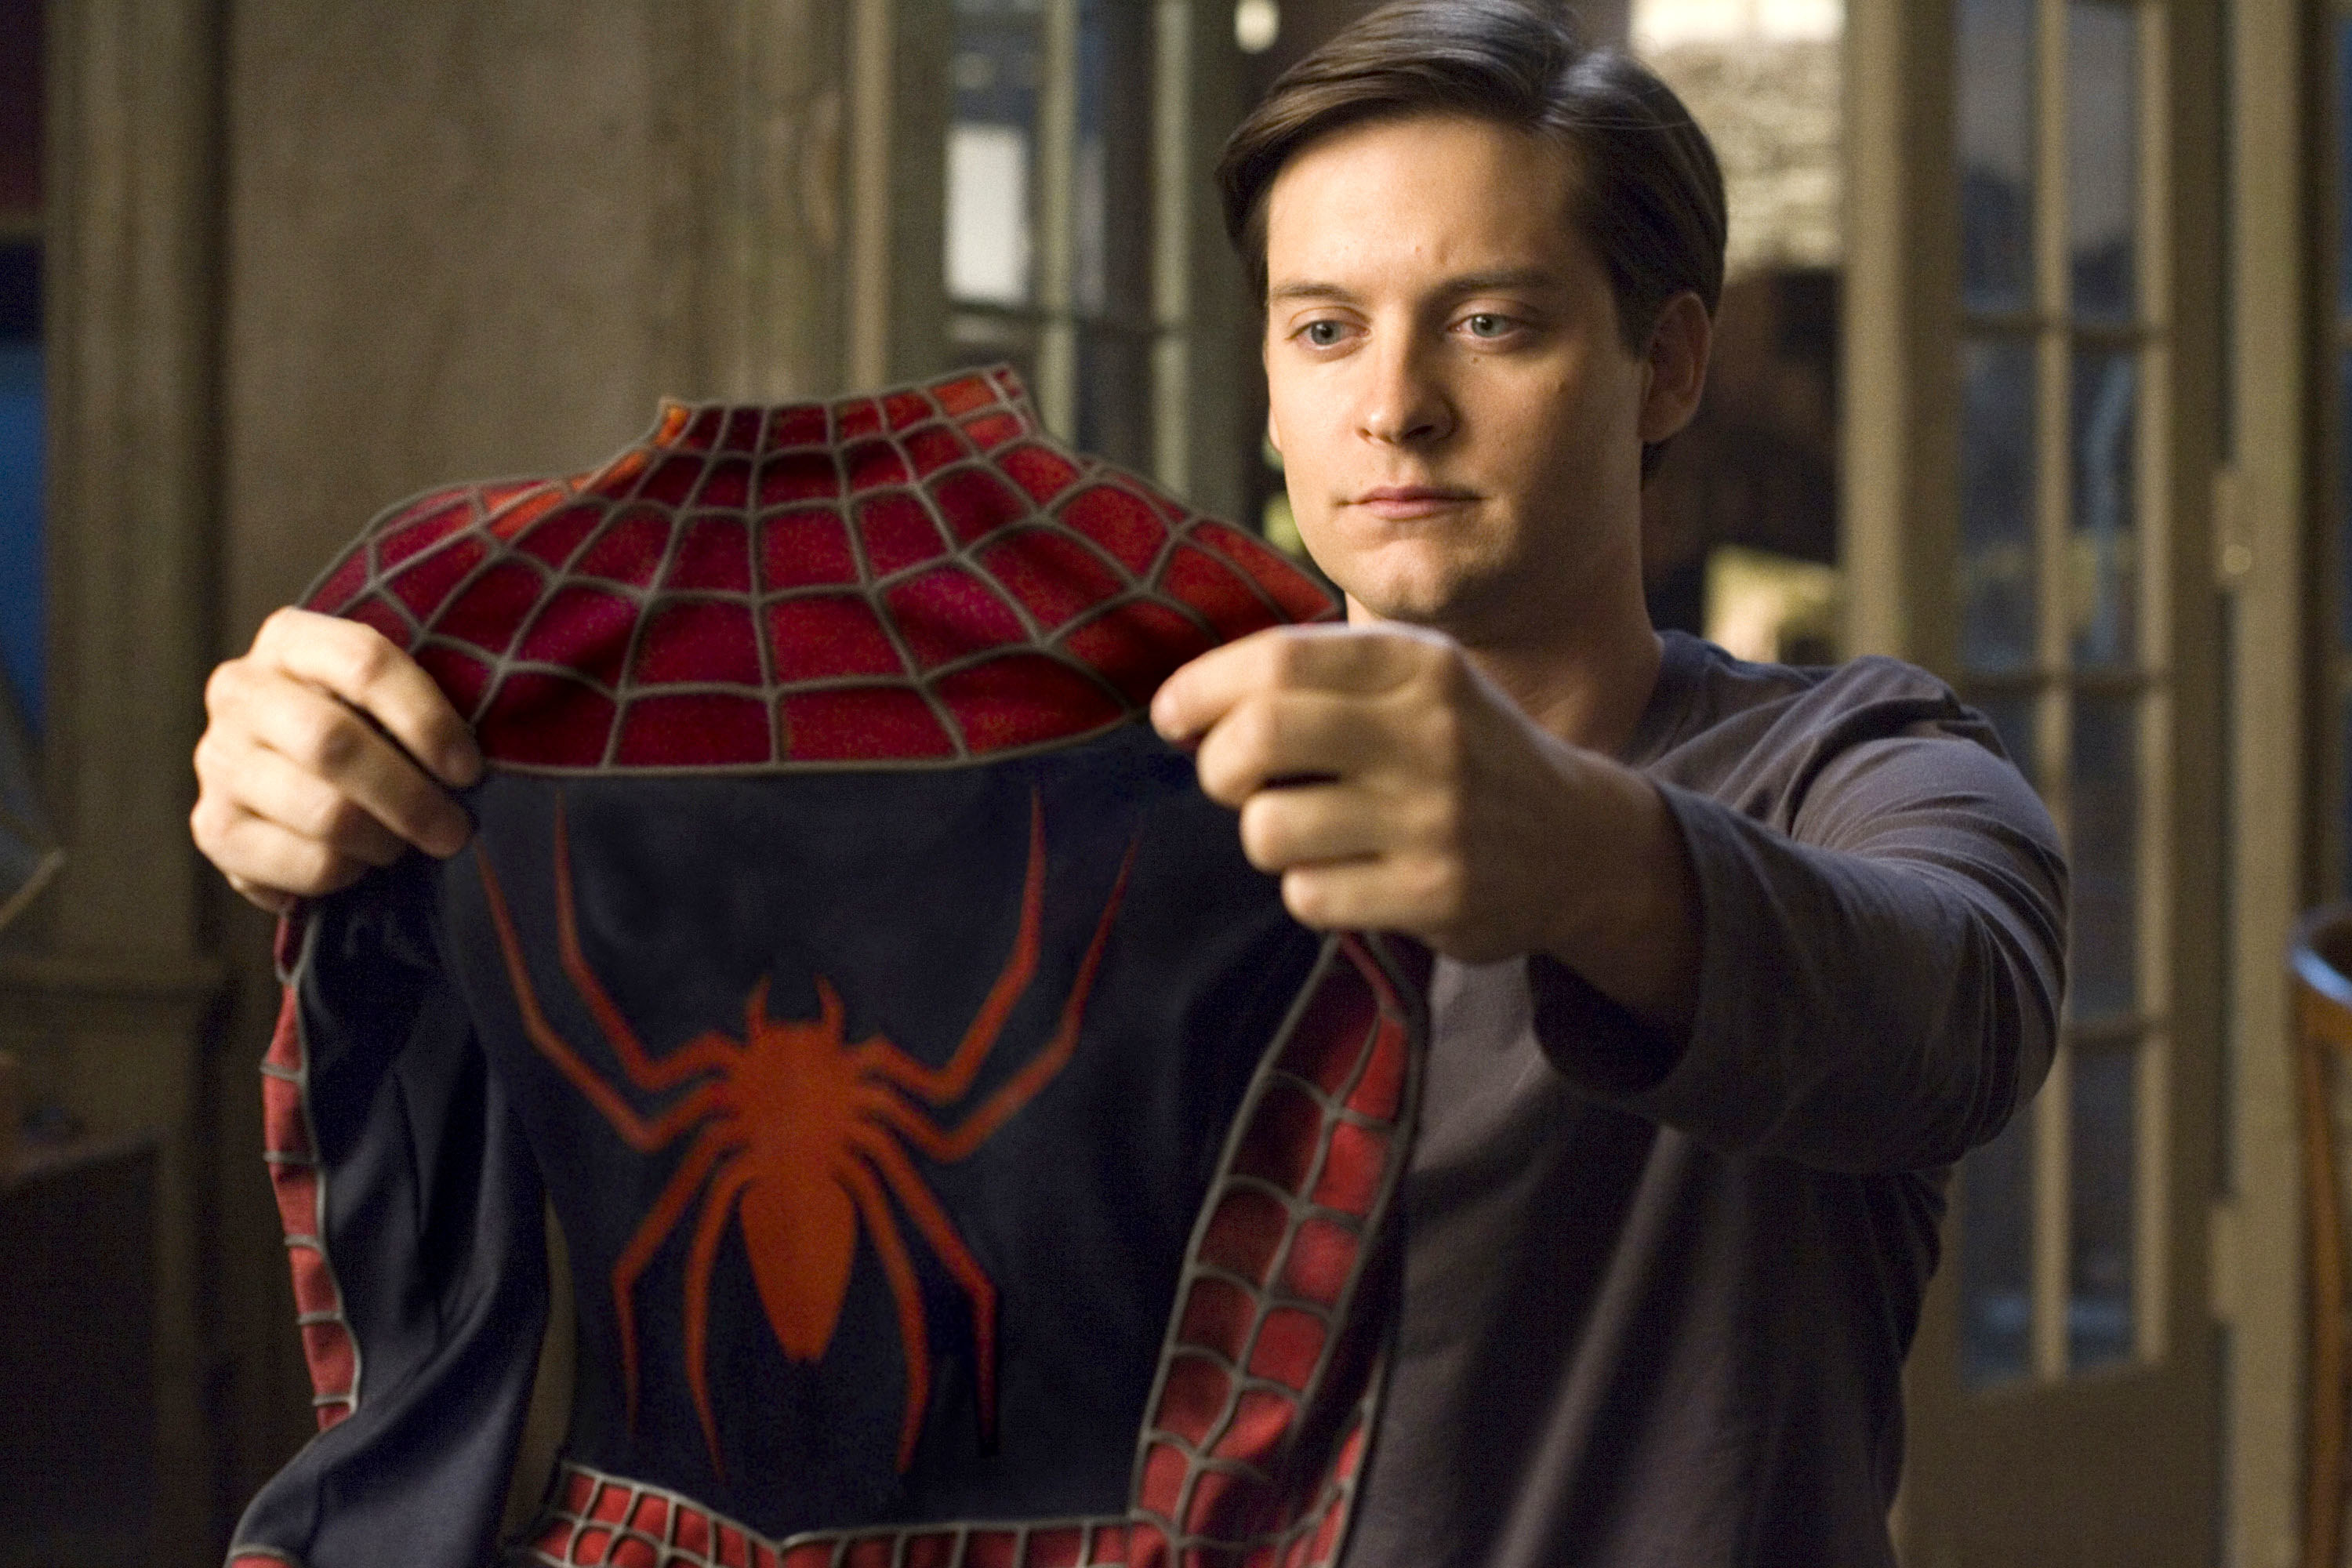 holding his Spidey suit out in from of him, Peter gazes at it